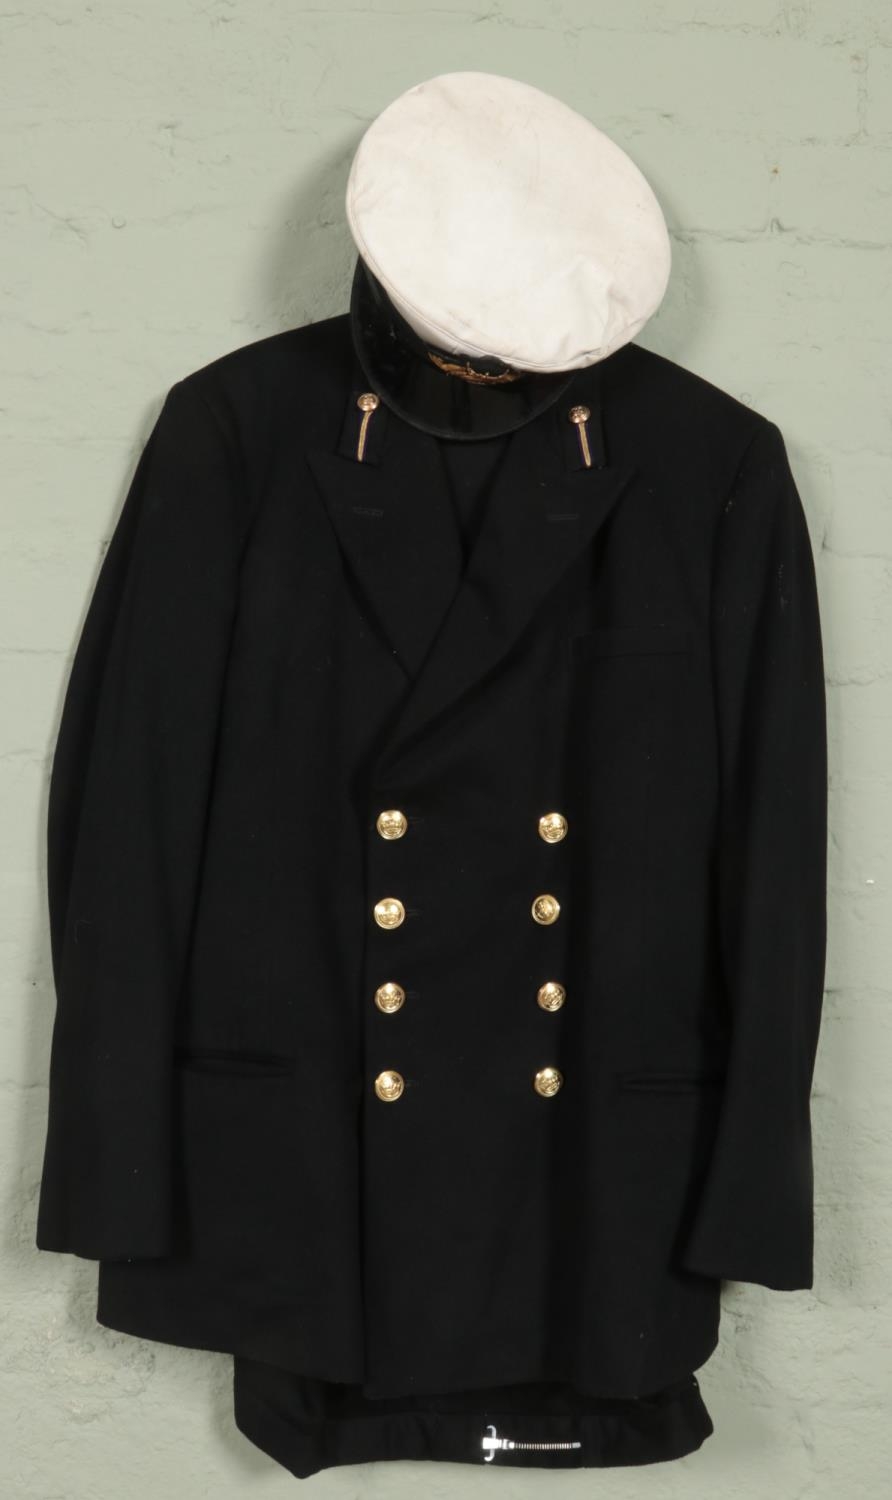 A merchant navy captains peak cap along with jacket and trousers.